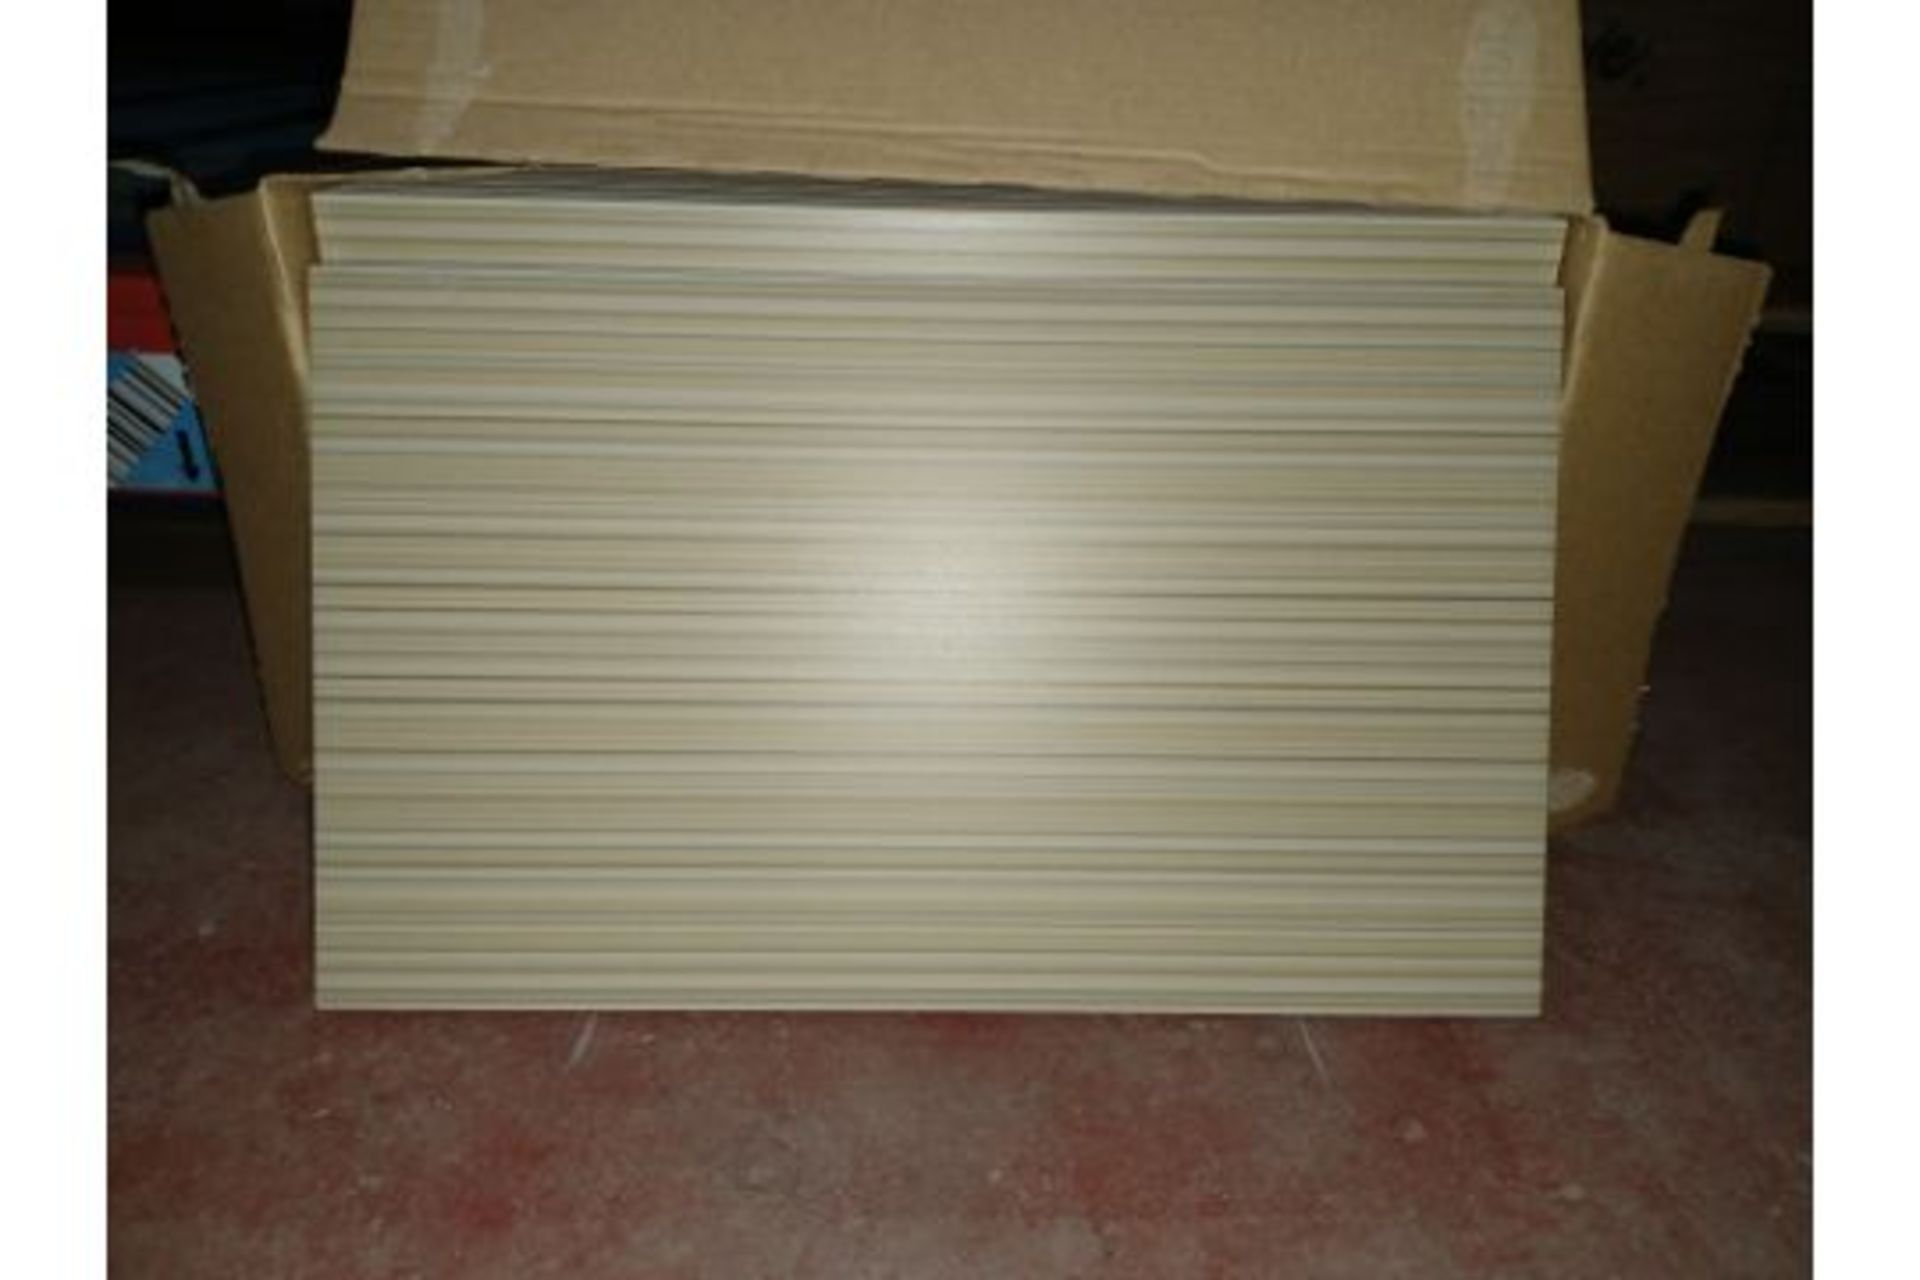 PALLET TO CONTAIN 40 x PACKS OF PORCELANOSA PARK LINEA COLOR THREADS WALL TILES. SIZE: 200x316mm. - Image 2 of 2